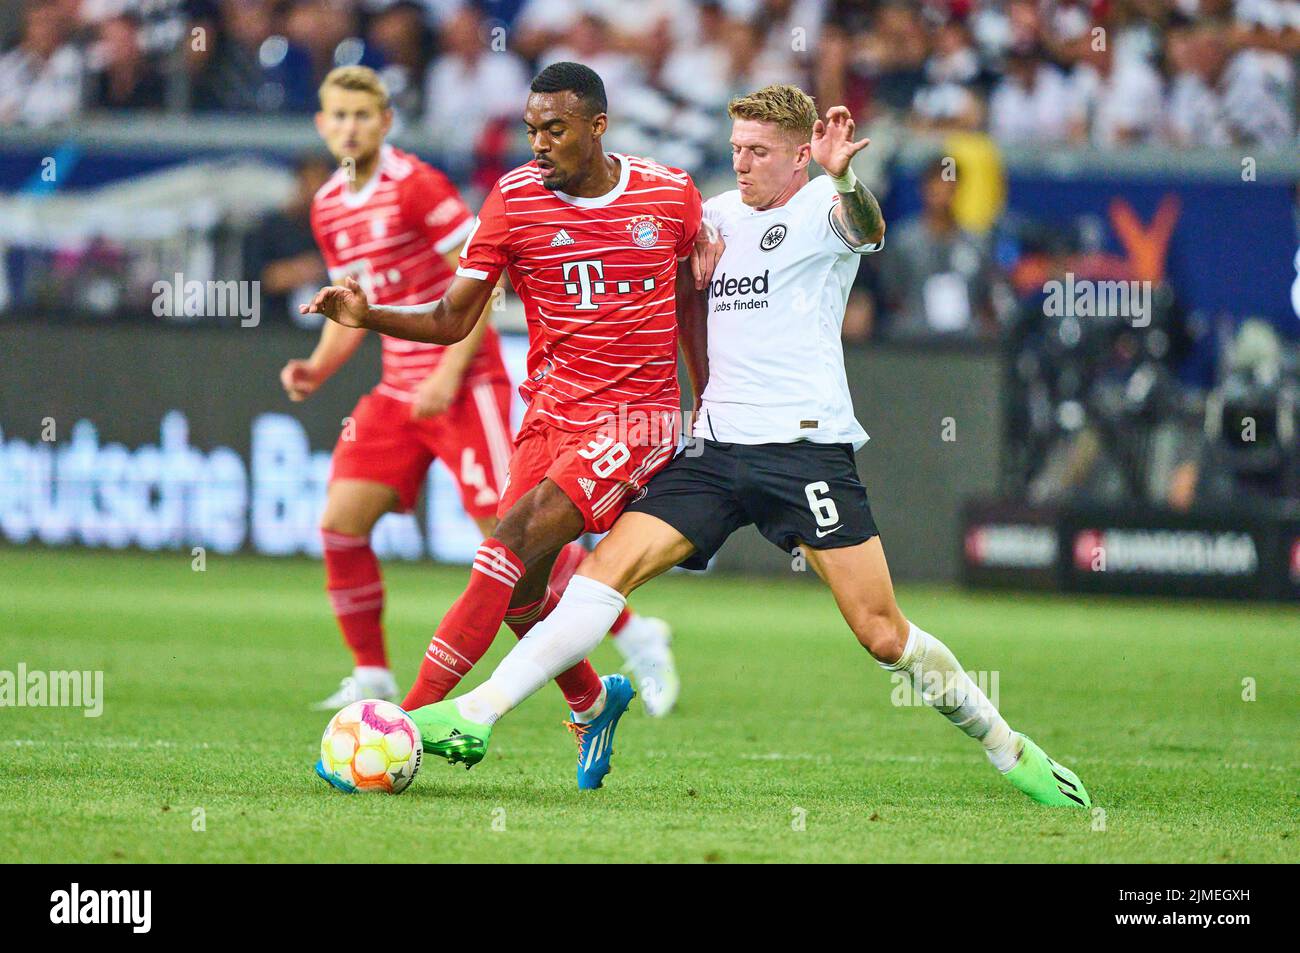 Ryan Gravenberch, FCB 38    compete for the ball, tackling, duel, header, zweikampf, action, fight against Kristijan Jakicc, FRA 6   in the match EINTRACHT FRANKFURT - FC BAYERN MÜNCHEN  1-6 1.German Football League on Aug 05, 2022 in Frankfurt, Germany. Season 2022/2023, matchday 1, 1.Bundesliga, FCB, Munich, 1.Spieltag © Peter Schatz / Alamy Live News    - DFL REGULATIONS PROHIBIT ANY USE OF PHOTOGRAPHS as IMAGE SEQUENCES and/or QUASI-VIDEO - Stock Photo